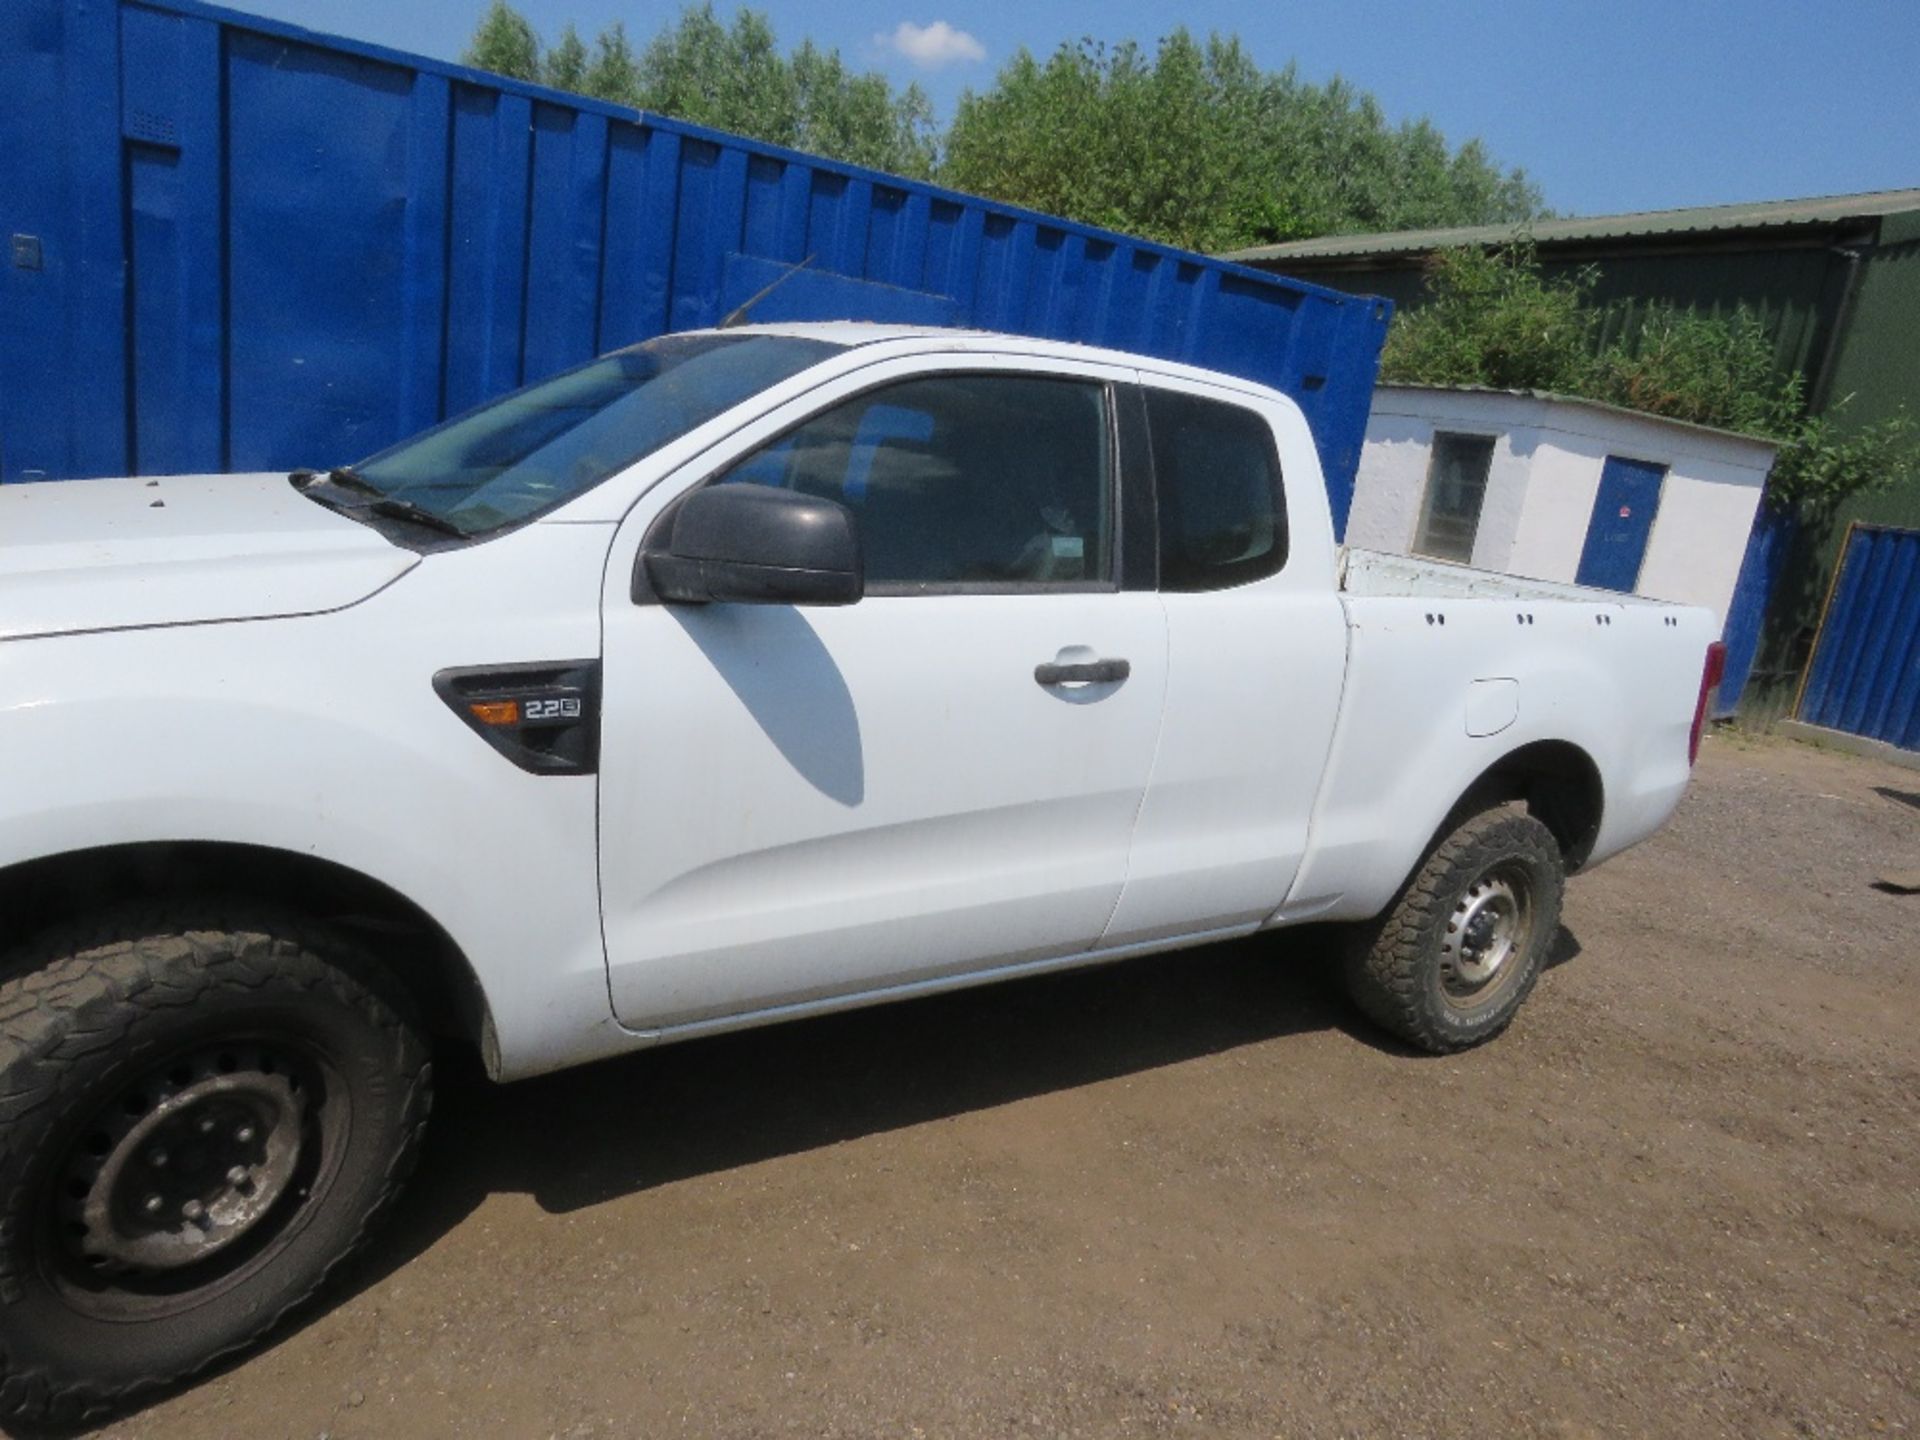 FORD RANGER SPACE CAB PICKUP TRUCK REG: EJ62 PVY. DIRECT FROM LOCAL COMPANY WITH V5. 2.2LITRE, 6 SP - Image 2 of 10